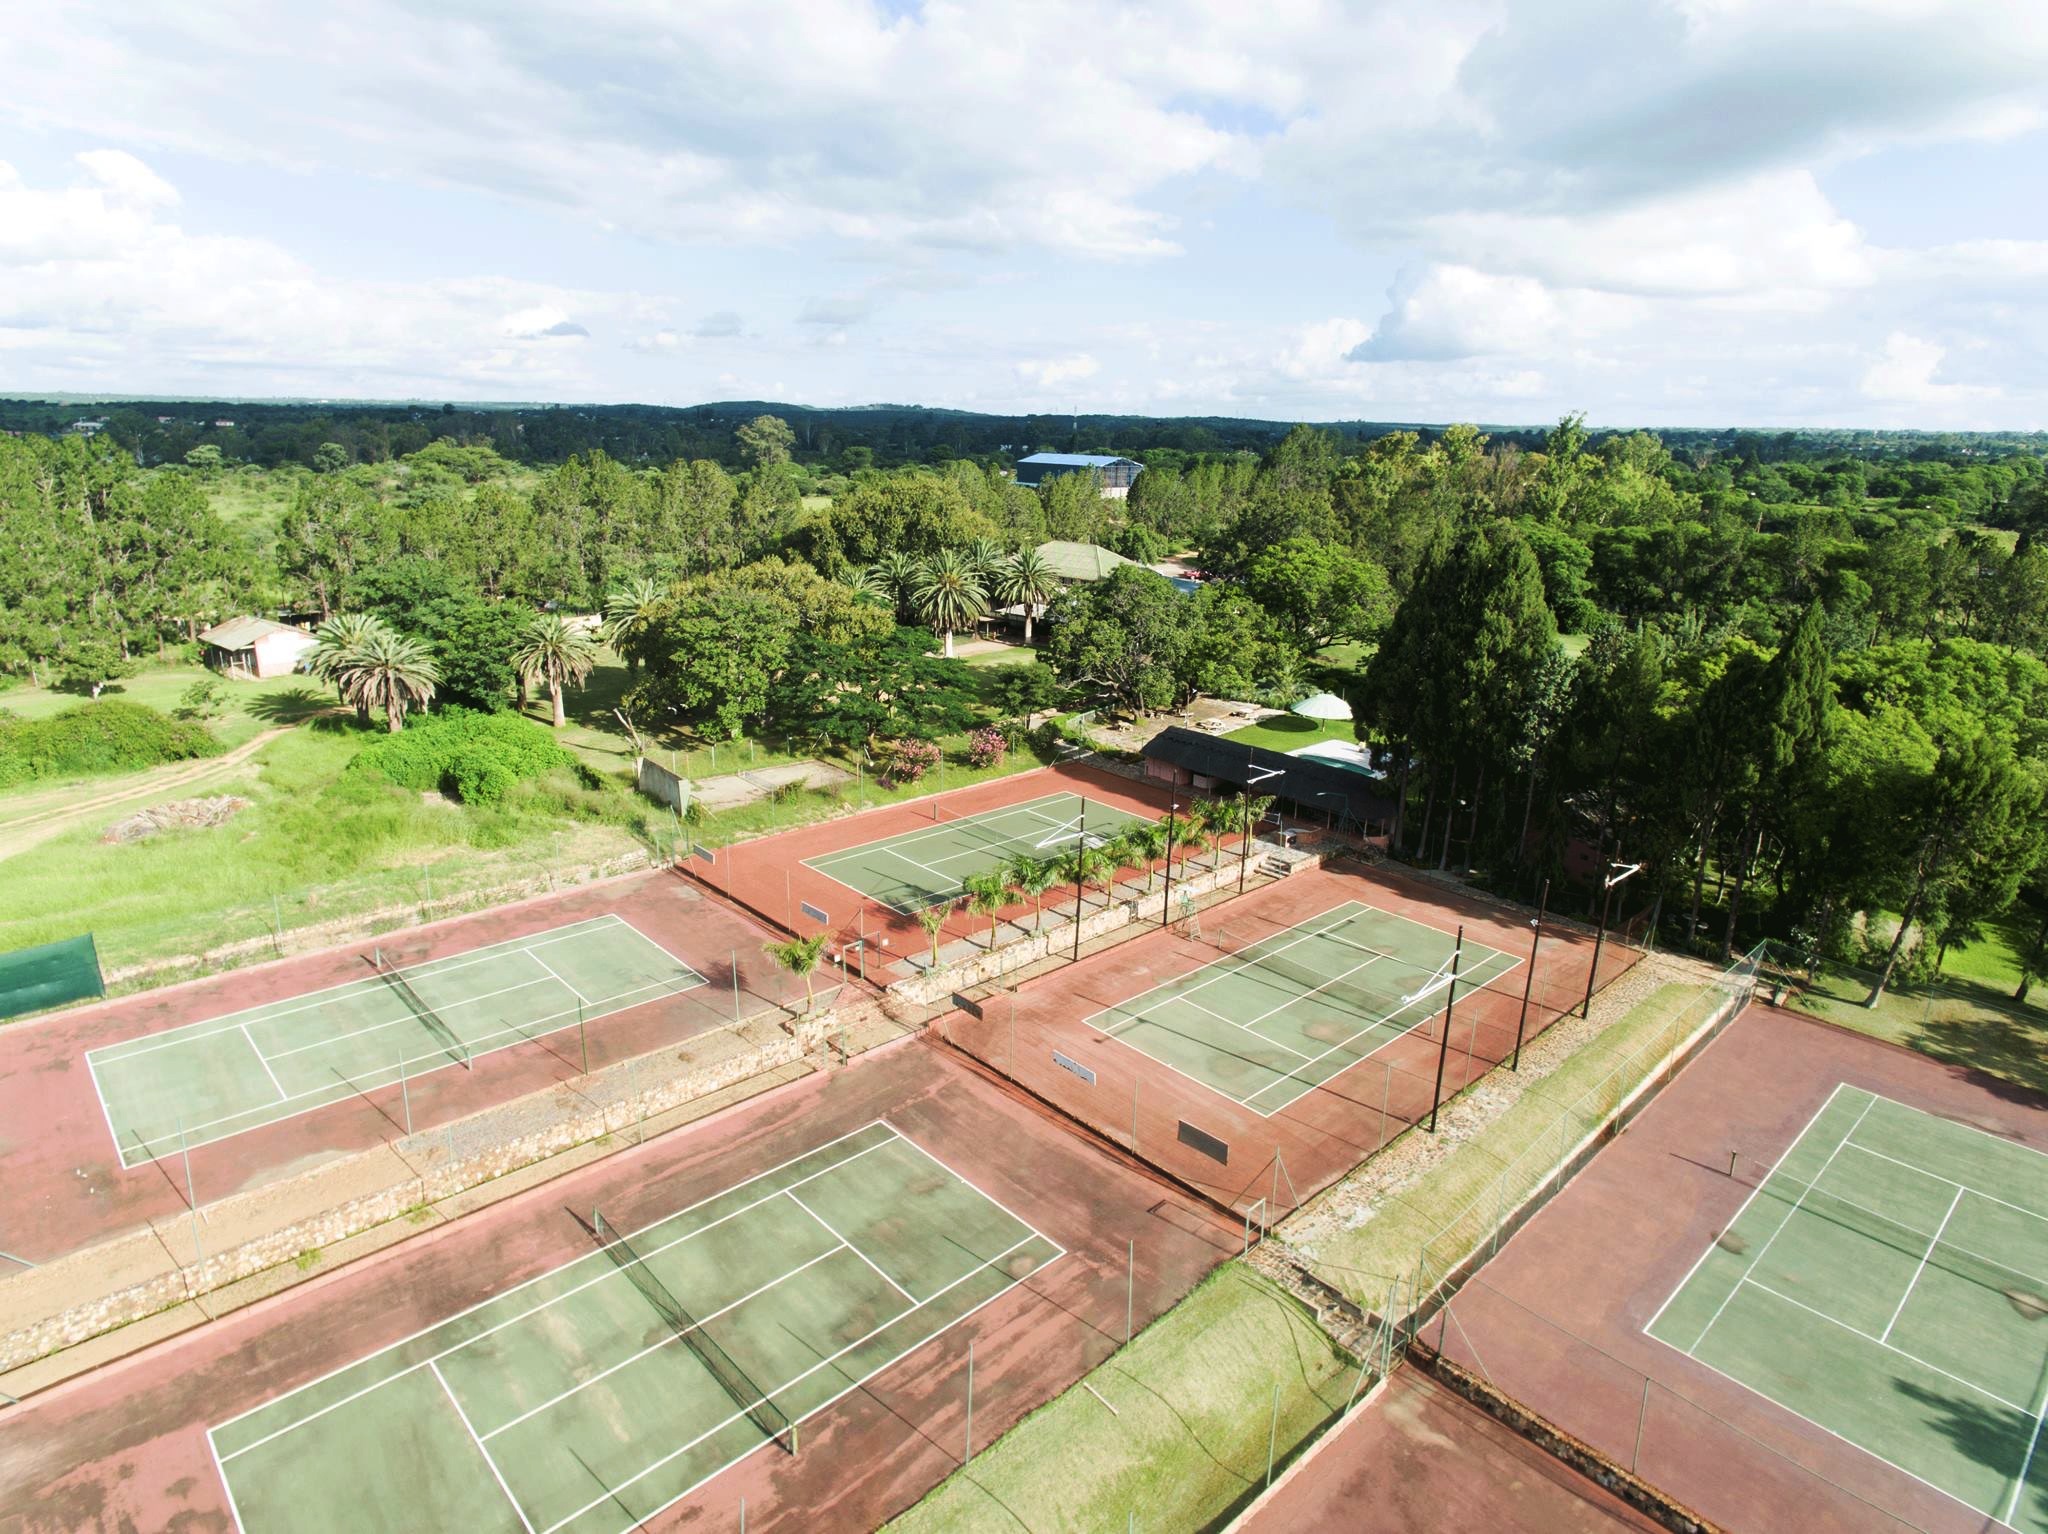 cl_golf_bcc_tennis_courts_all